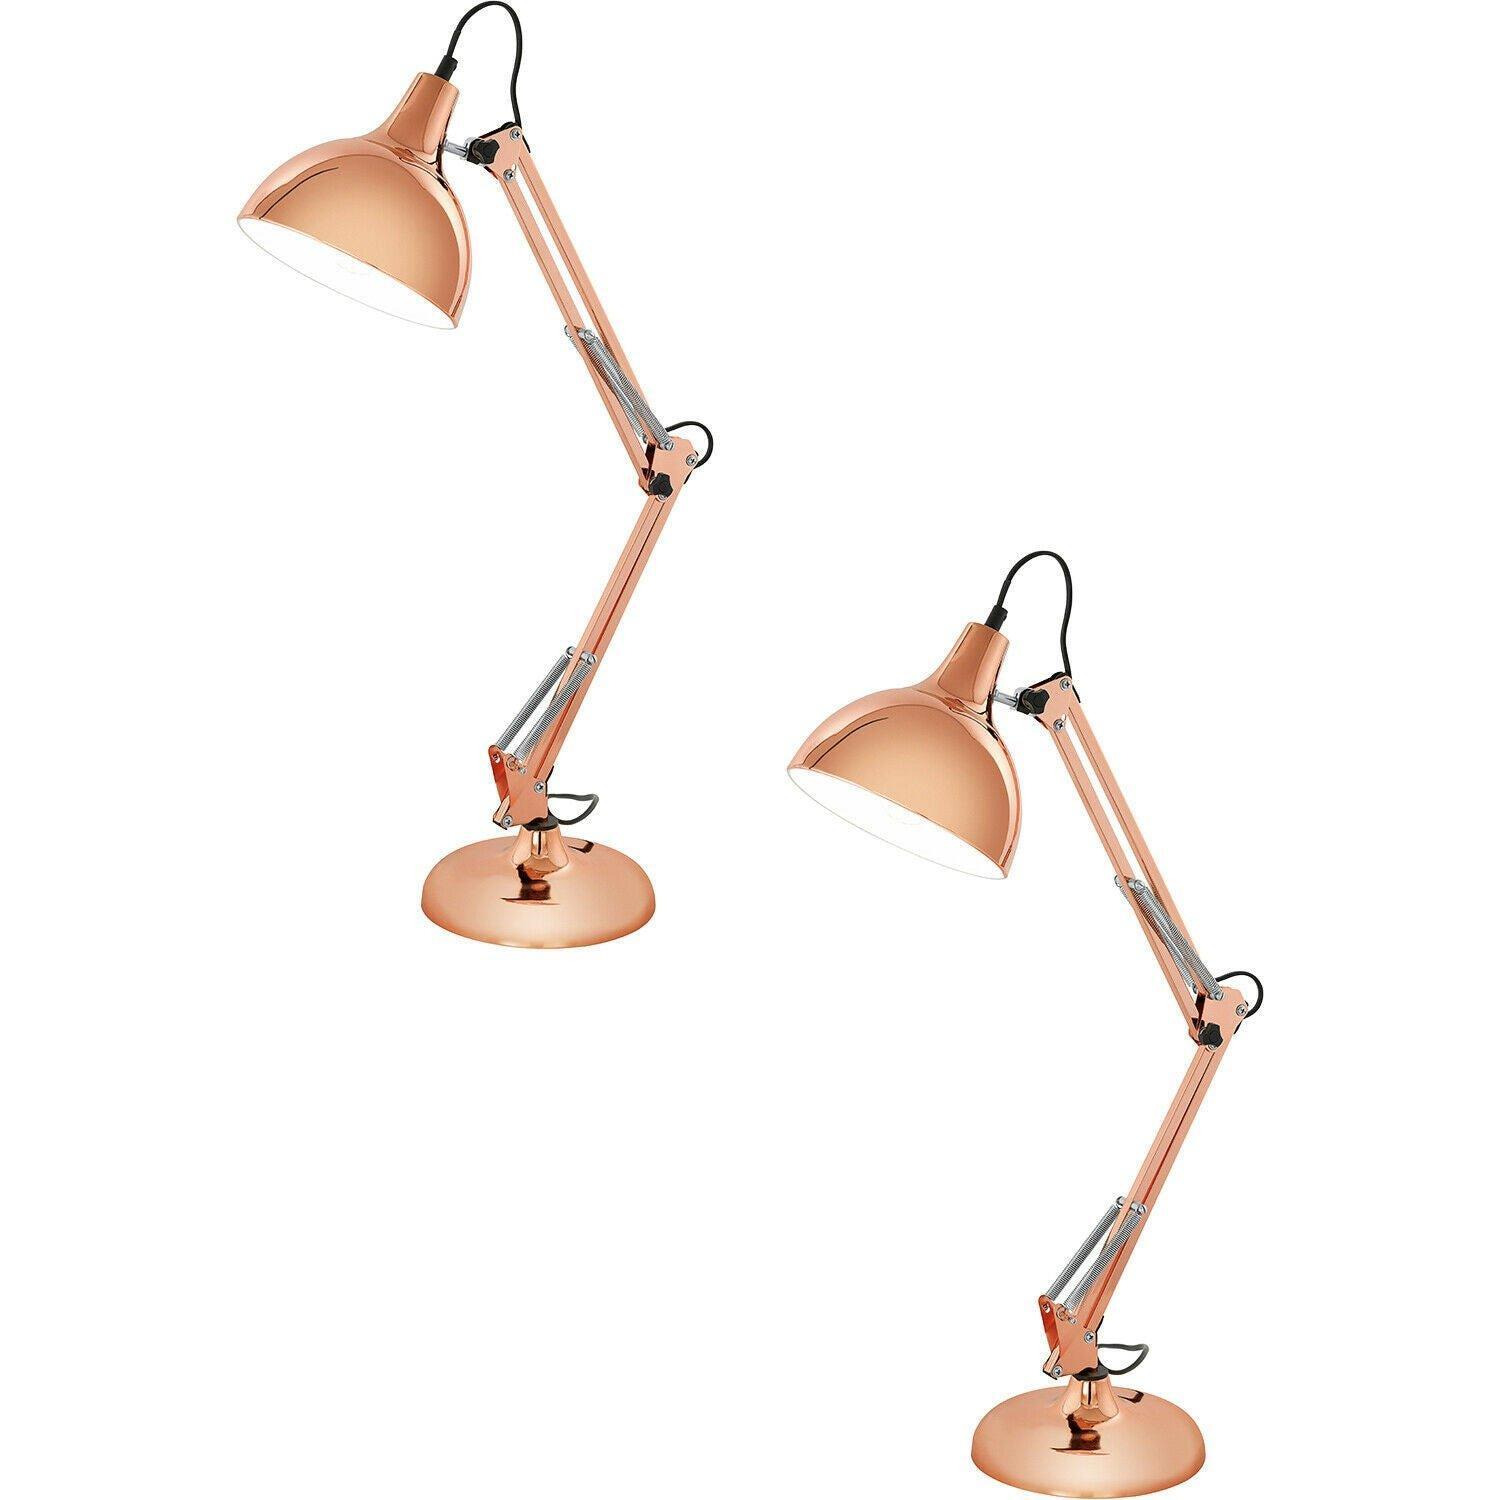 2 PACK Table Desk Lamp Colour Copper Adjustable In Line Switch Bulb E27 1x40W - image 1